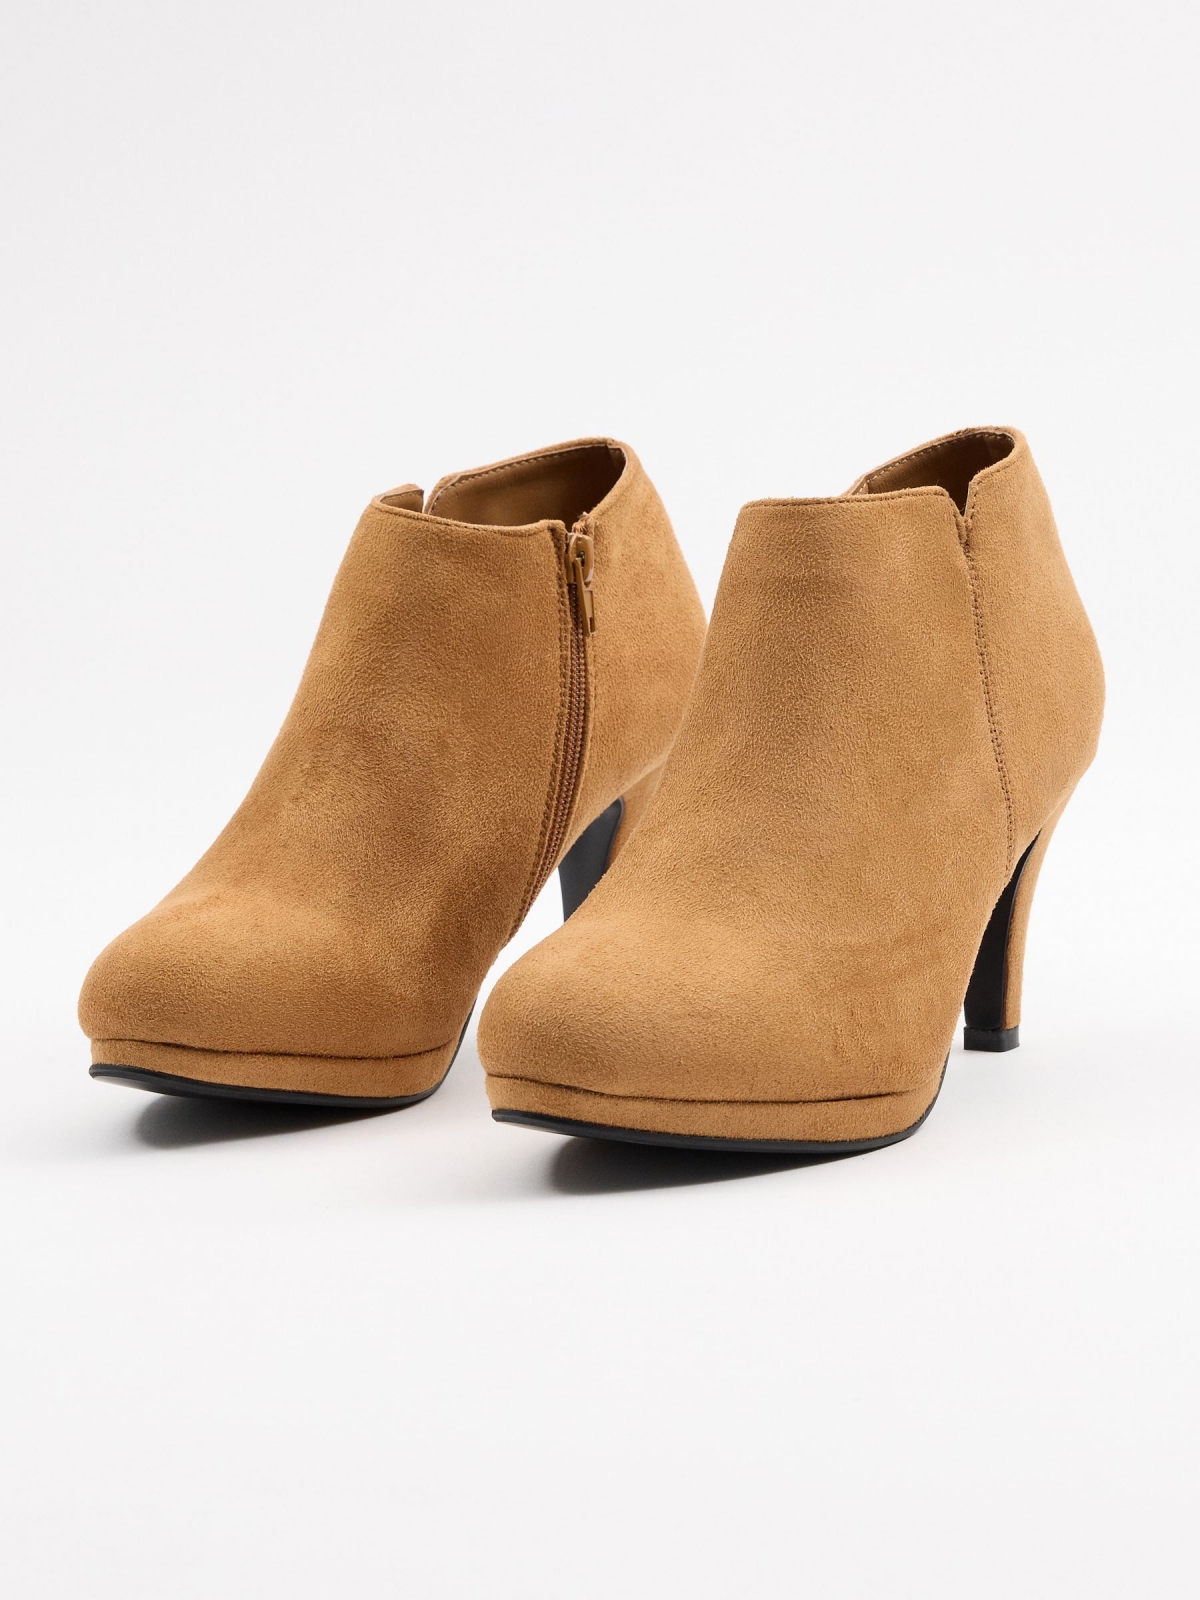 Basic brown ankle boot sand 45º front view